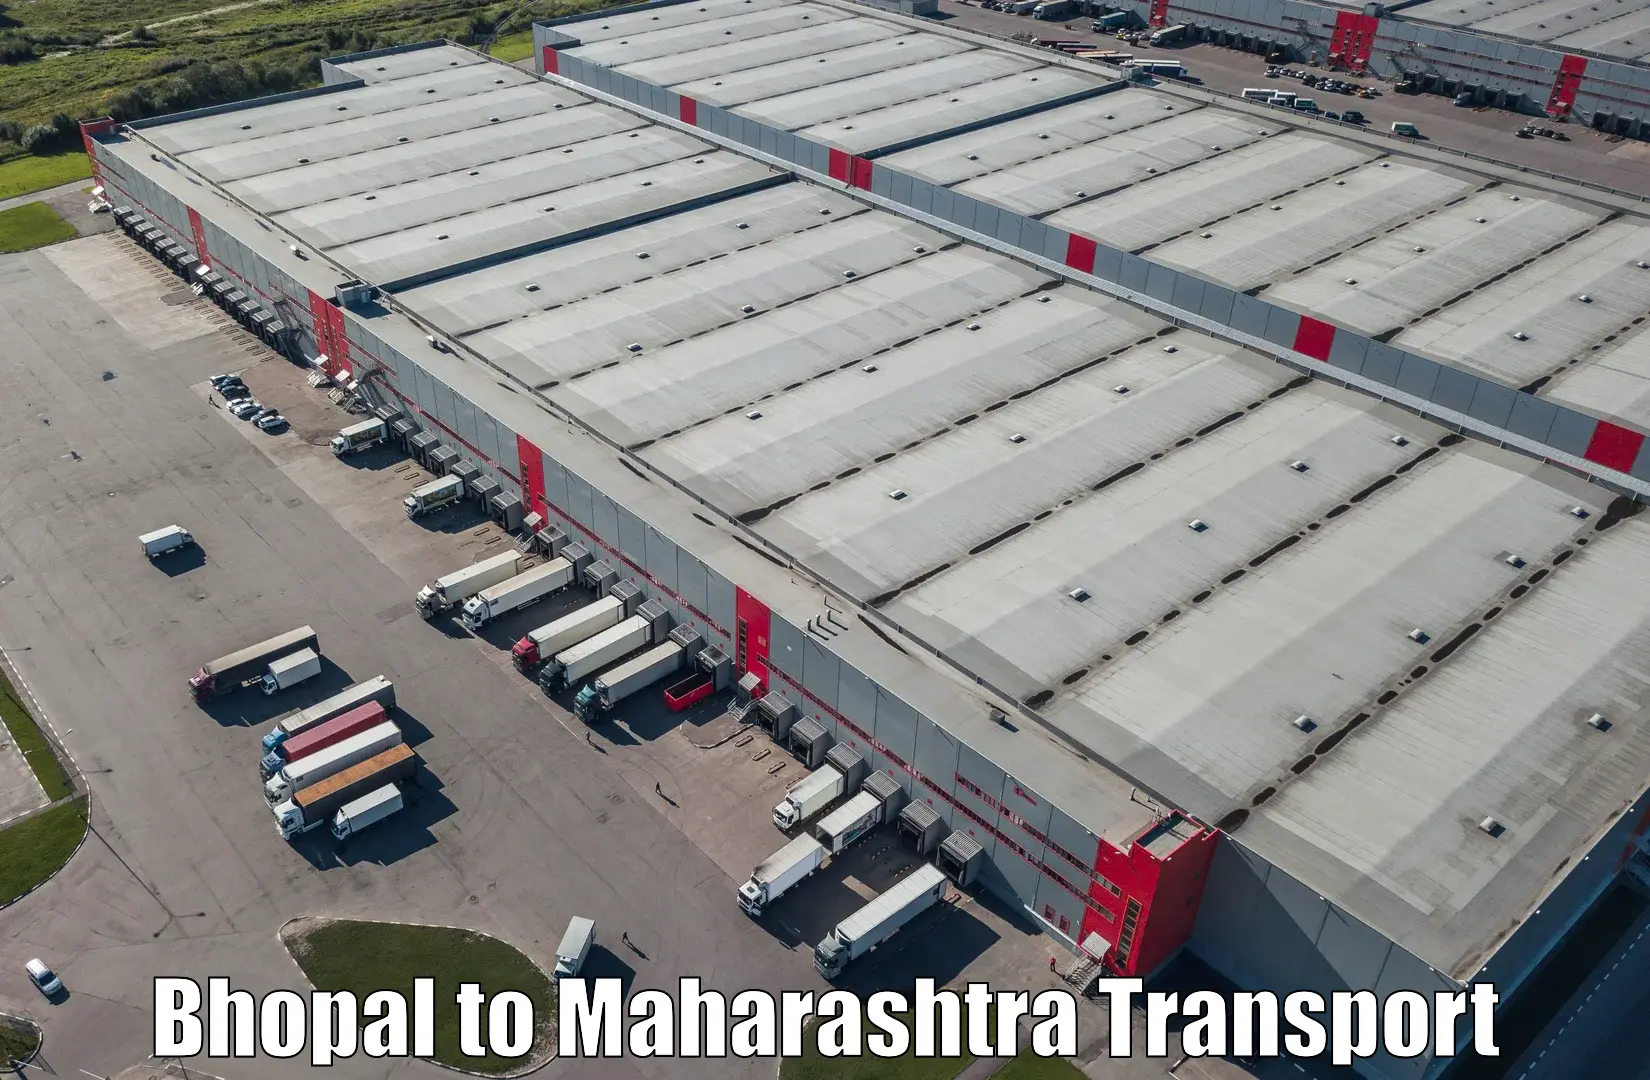 Container transport service Bhopal to Pune